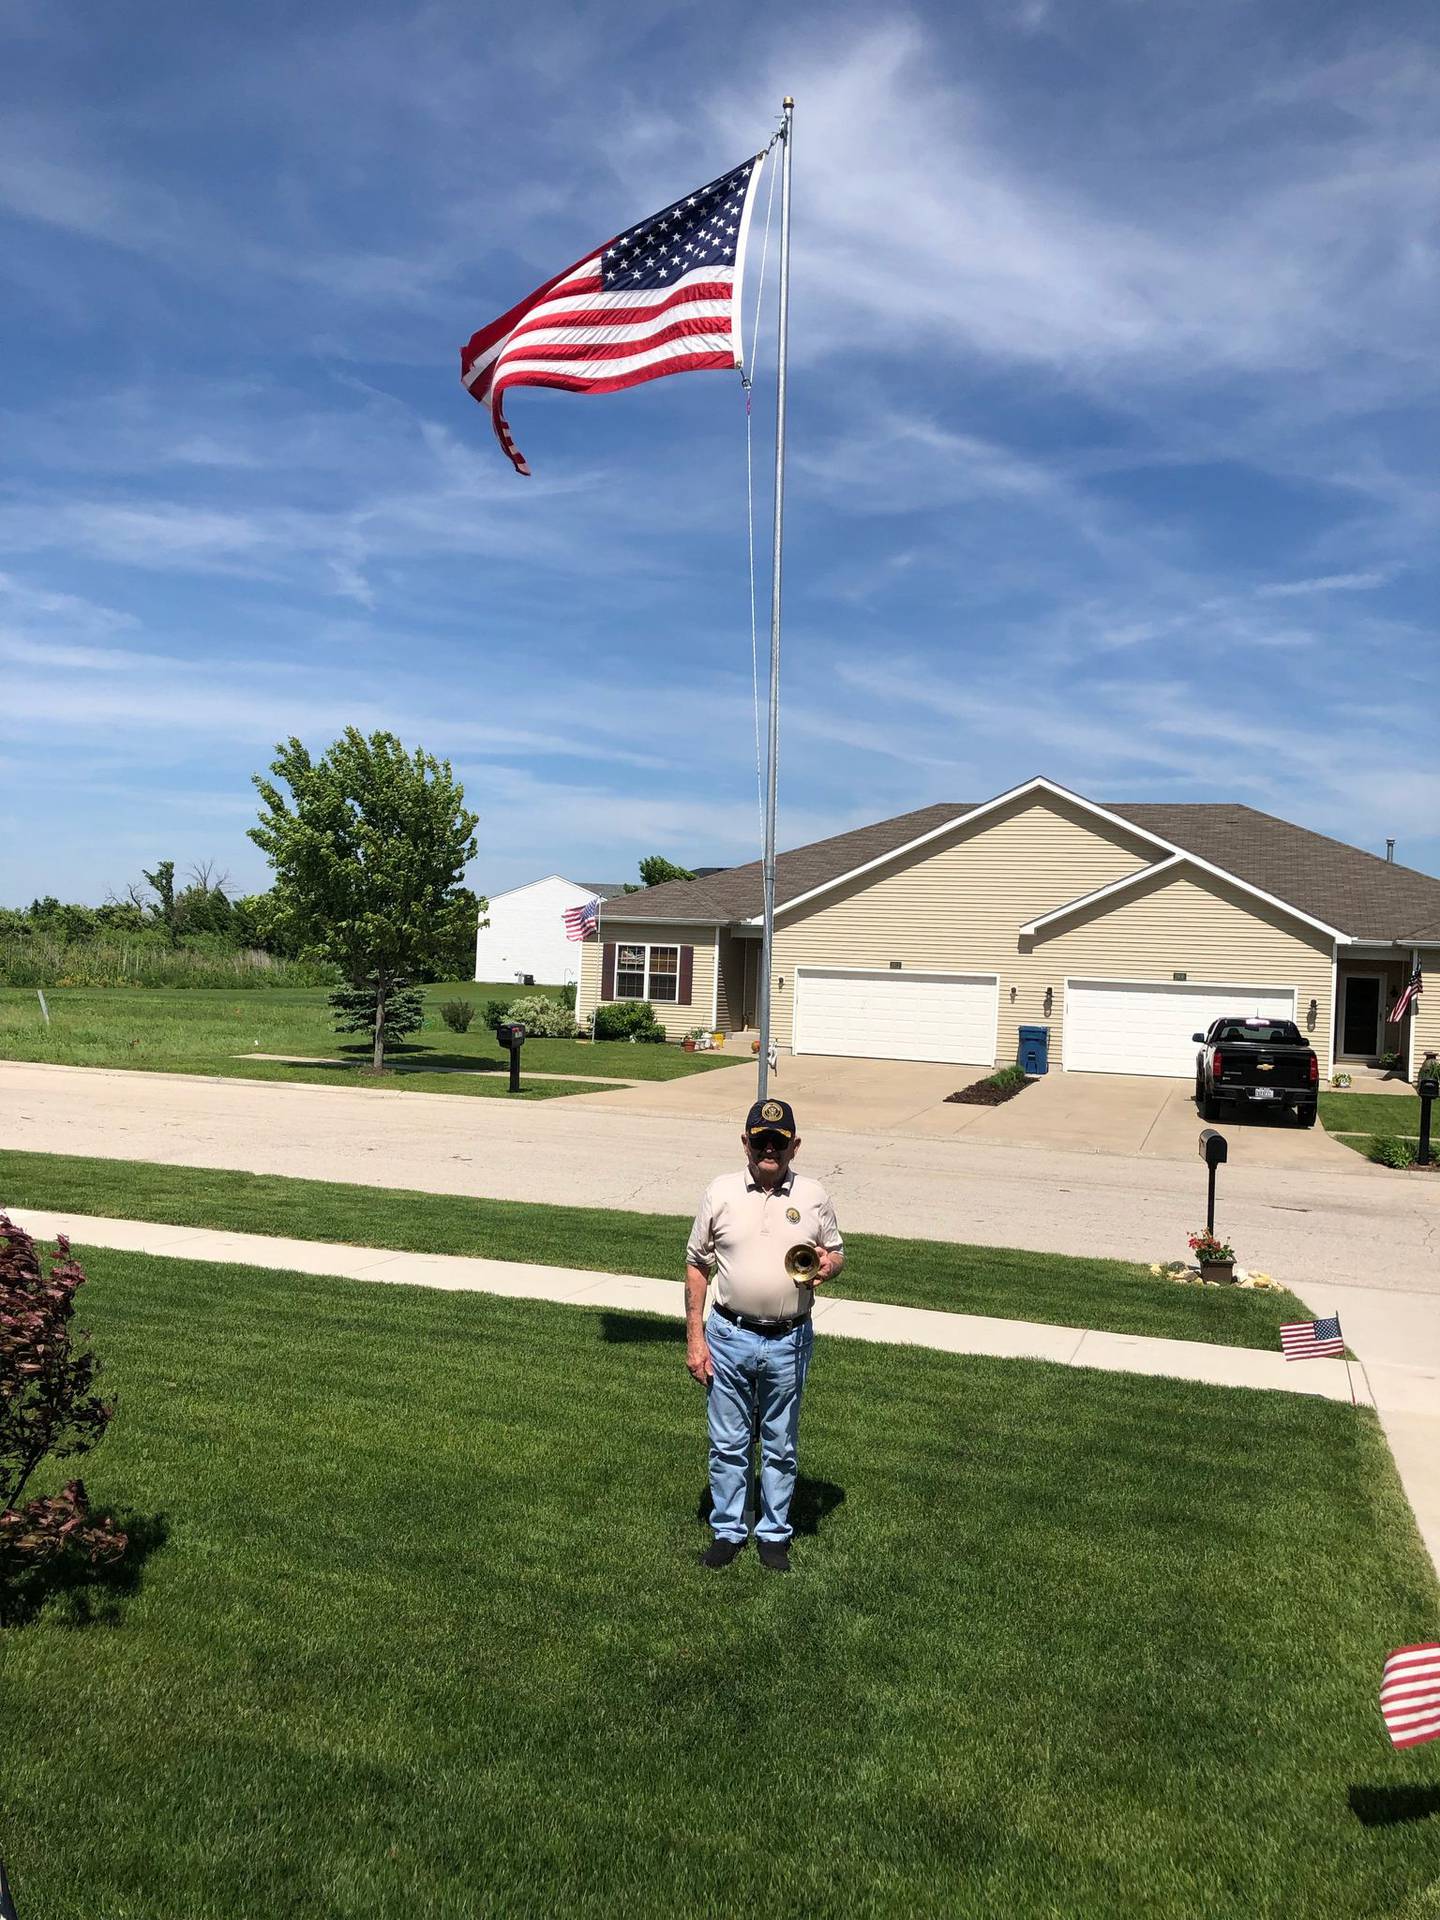 James McElroy of Morris is a proud Navy veteran. He flies a U.S. flag year-round and plays taps on Memorial Day as part of Taps Across America.